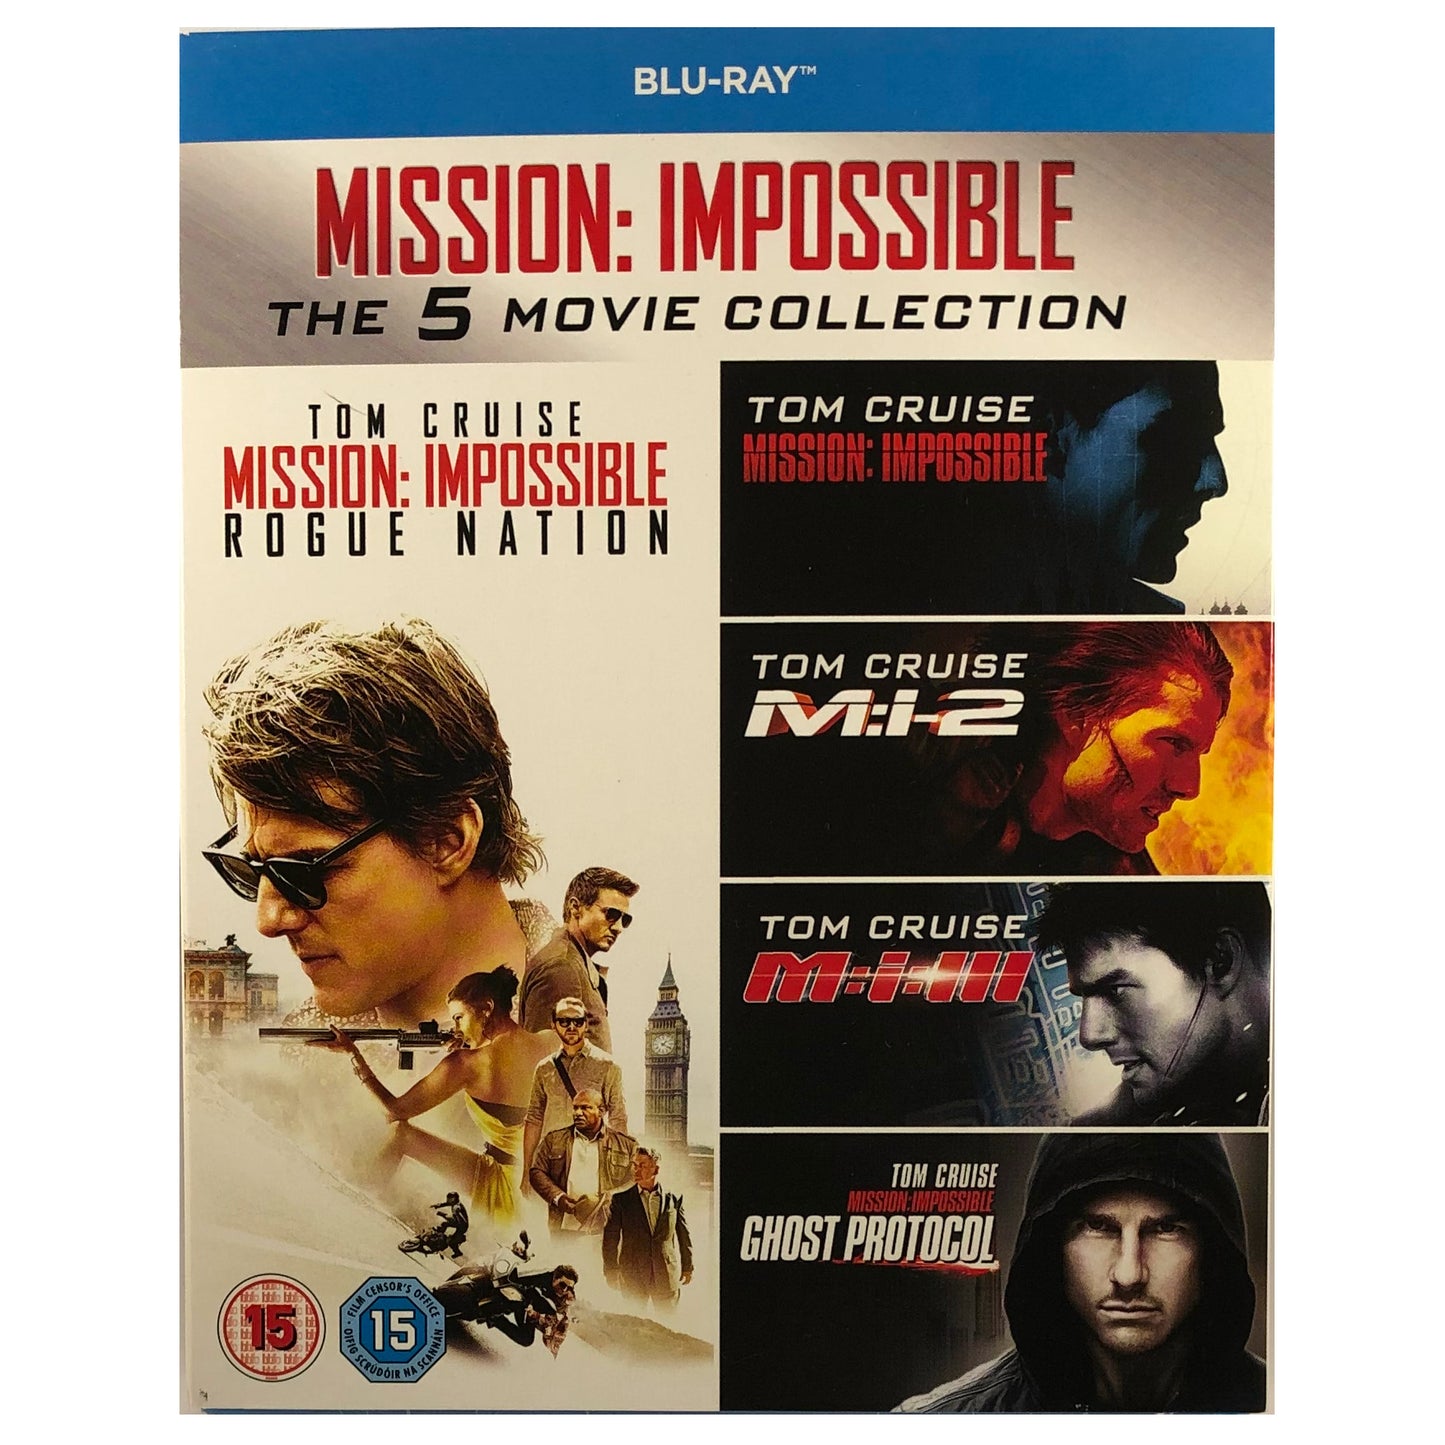 Mission: Impossible - The 5 Movie Collection Blu-Ray Box Set